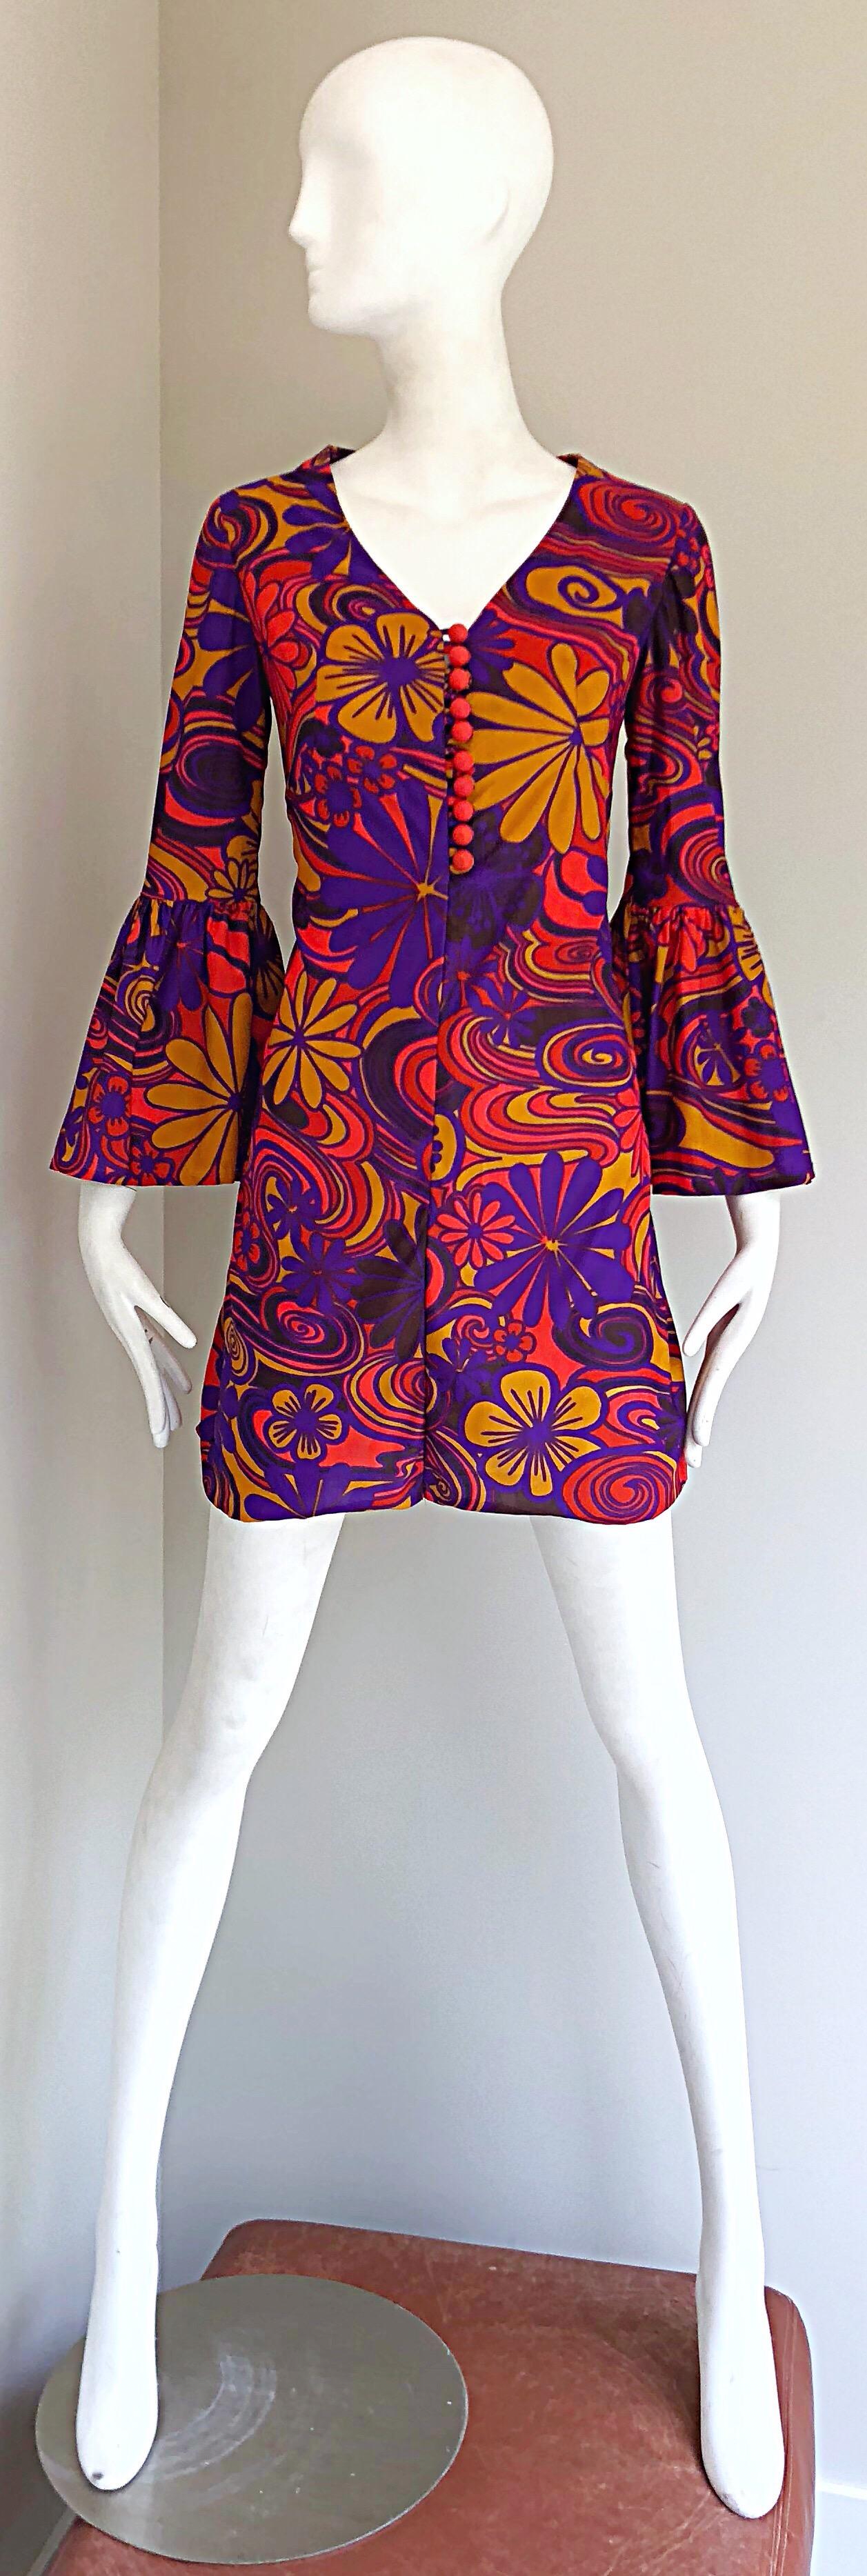 Amazing early 1970s flower power psychedelic tunic mini dress! Features flowers in various sizes, mixed with psychedelic prints. Vibrant colors of purple, orange and red throughout. Mock buttons up the bodice. Hidden zipper up the back. Great alone,